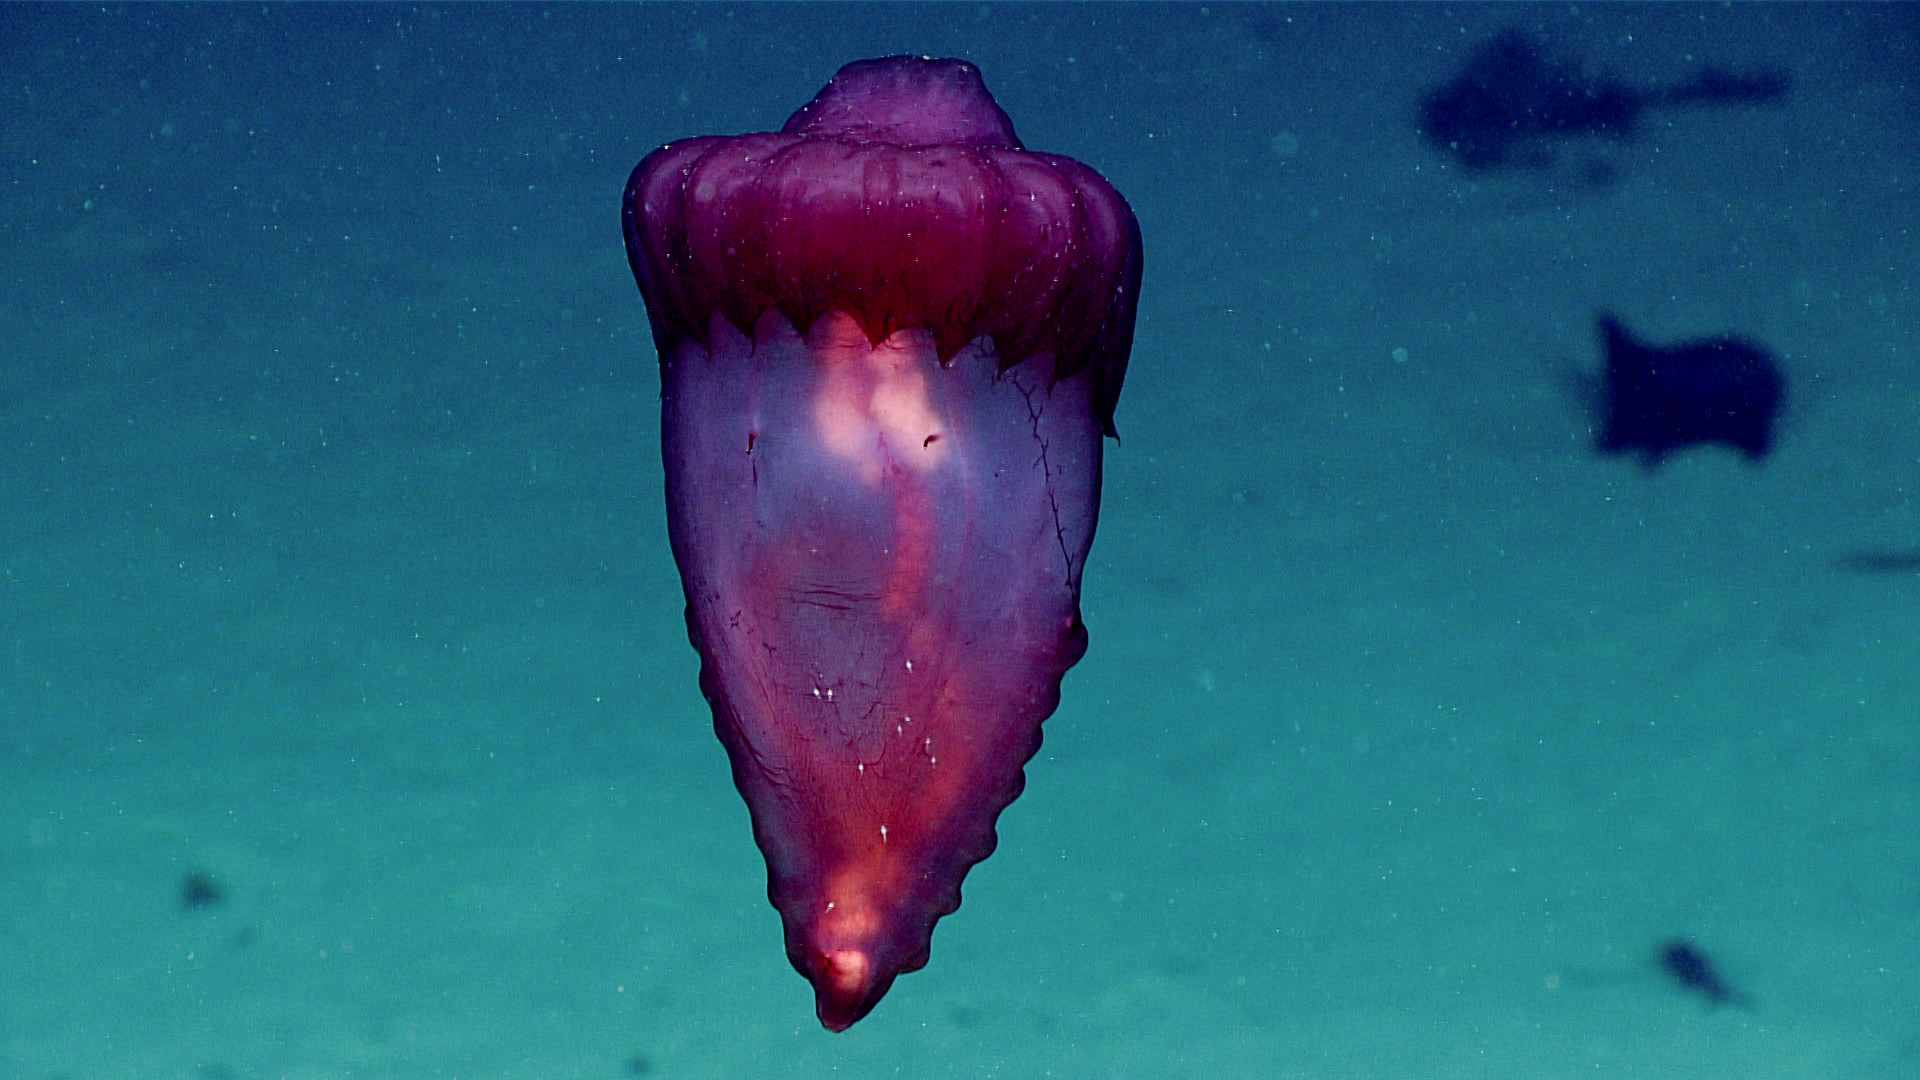 A purple and red elongated triangular creature with a translucent body, within which a white organ and pink intestines can be seen, against a sea blue background